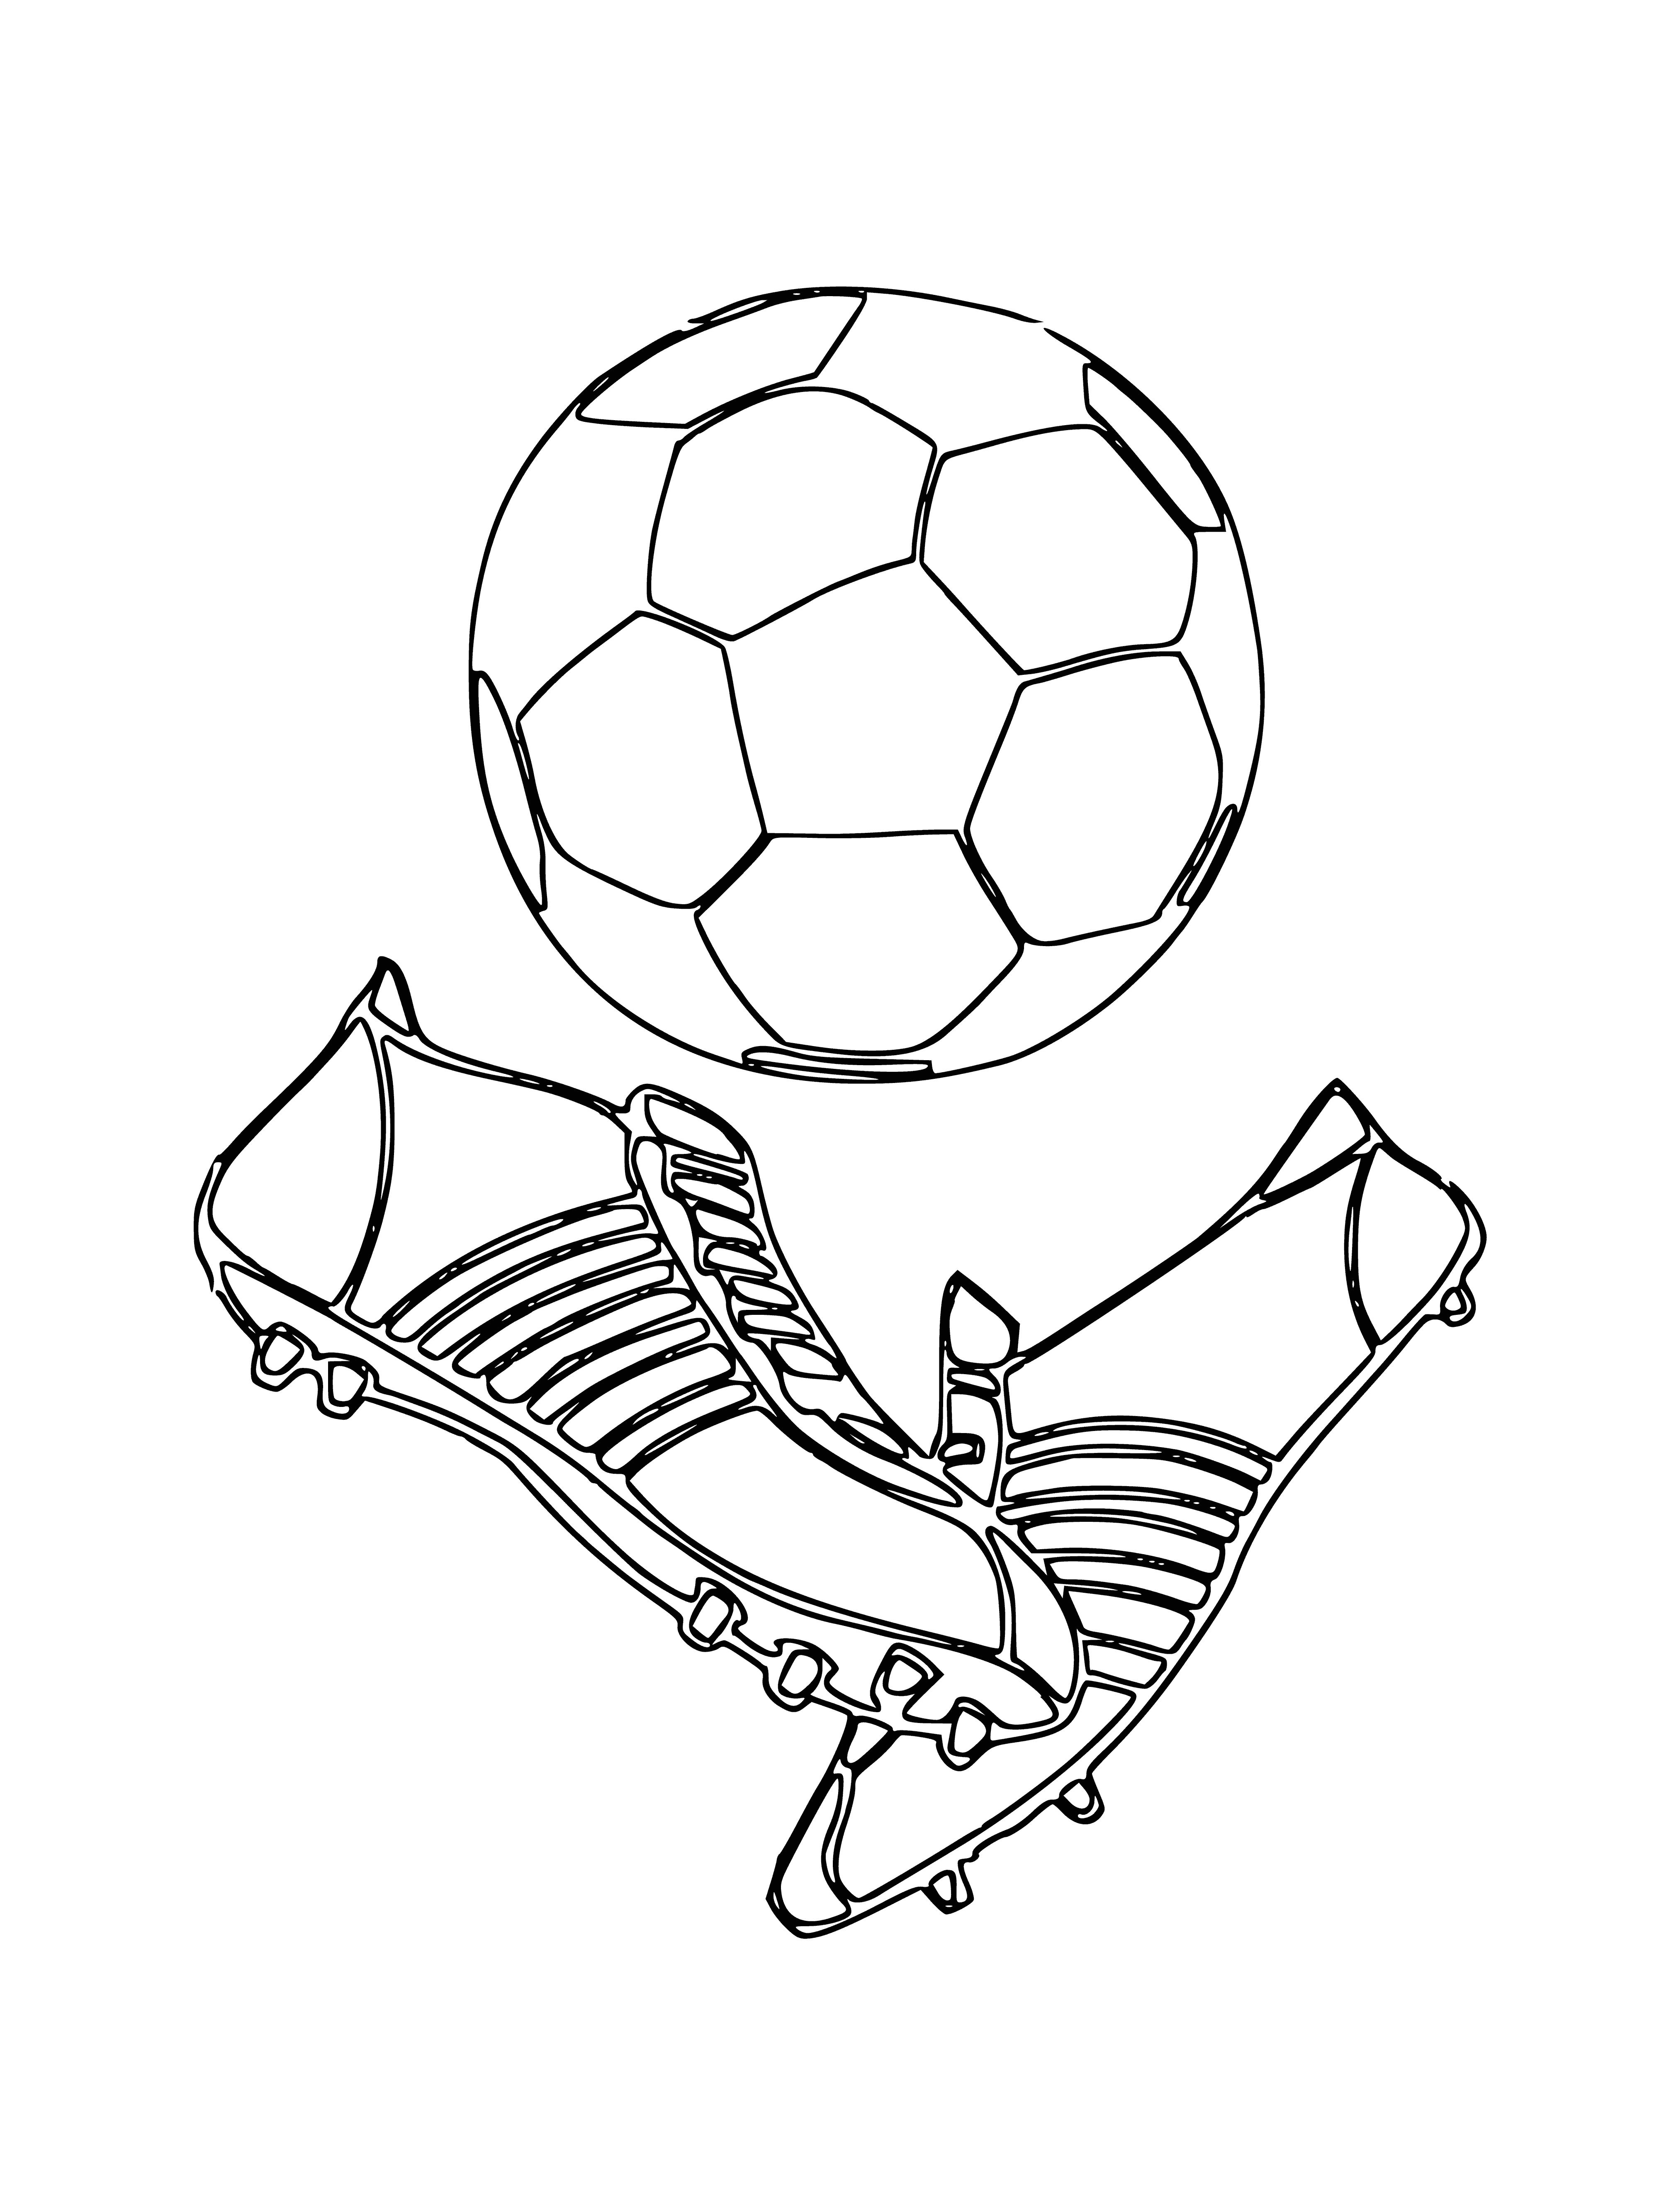 Soccer ball and boots coloring page